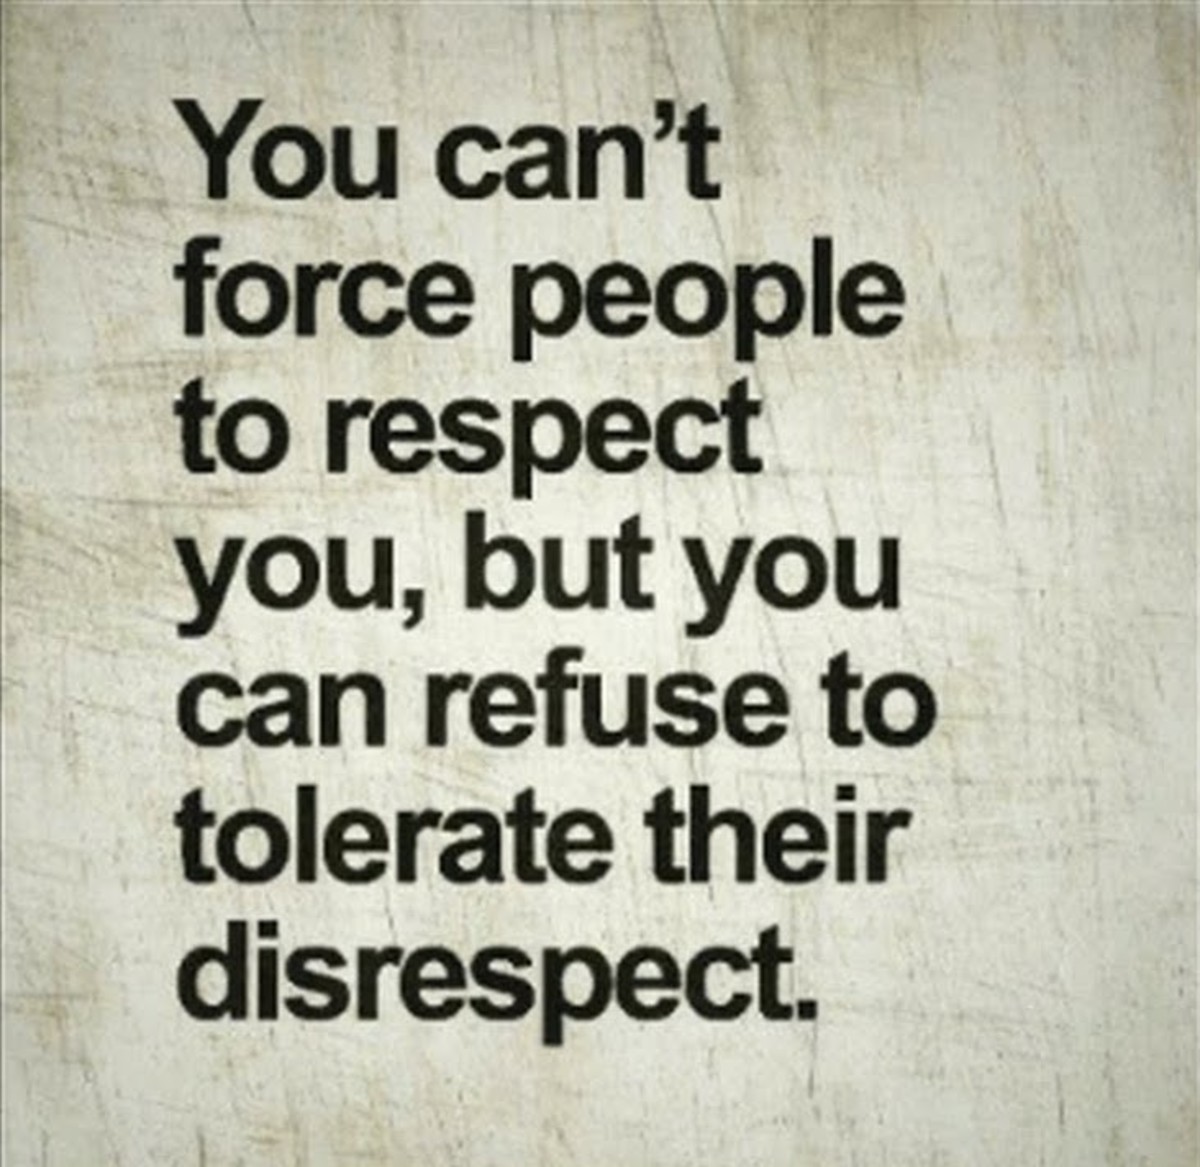 You can refuse to tolerate disrespect.